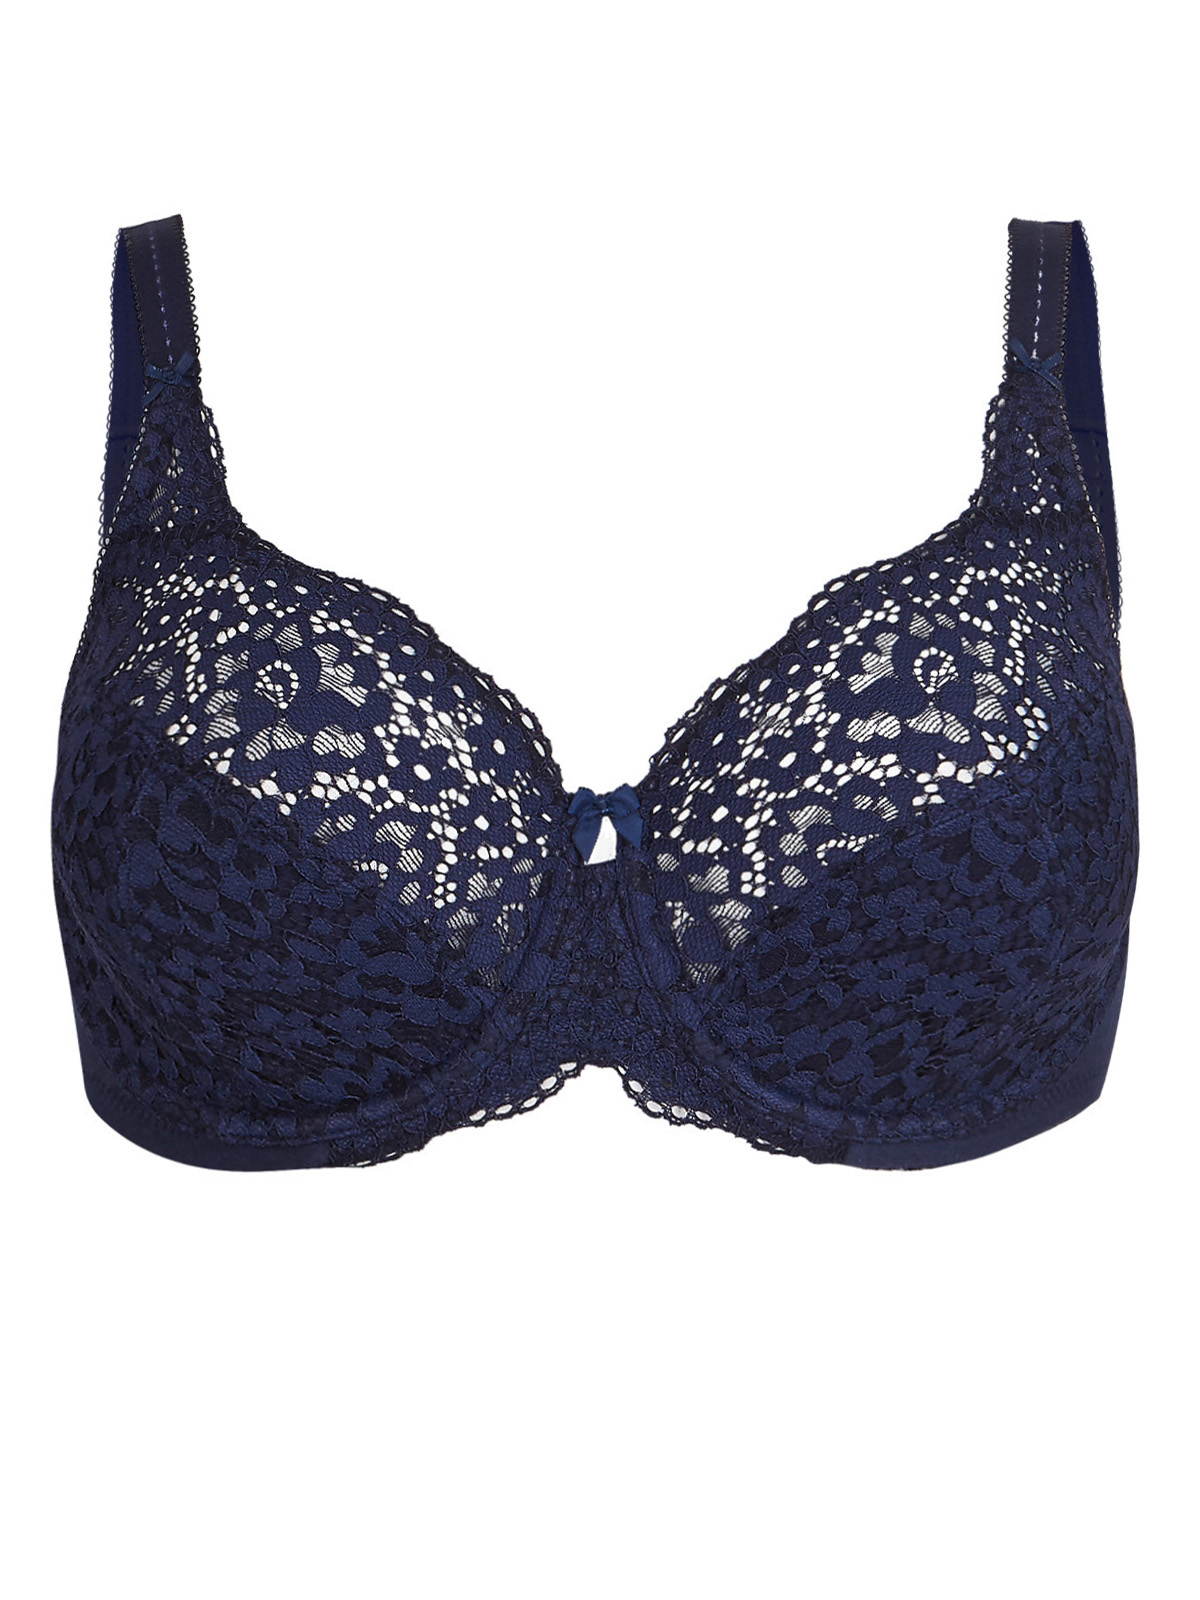 Marks and Spencer - - M&5 INDIGO Vintage Lace Non-Padded Full Cup Bra ...